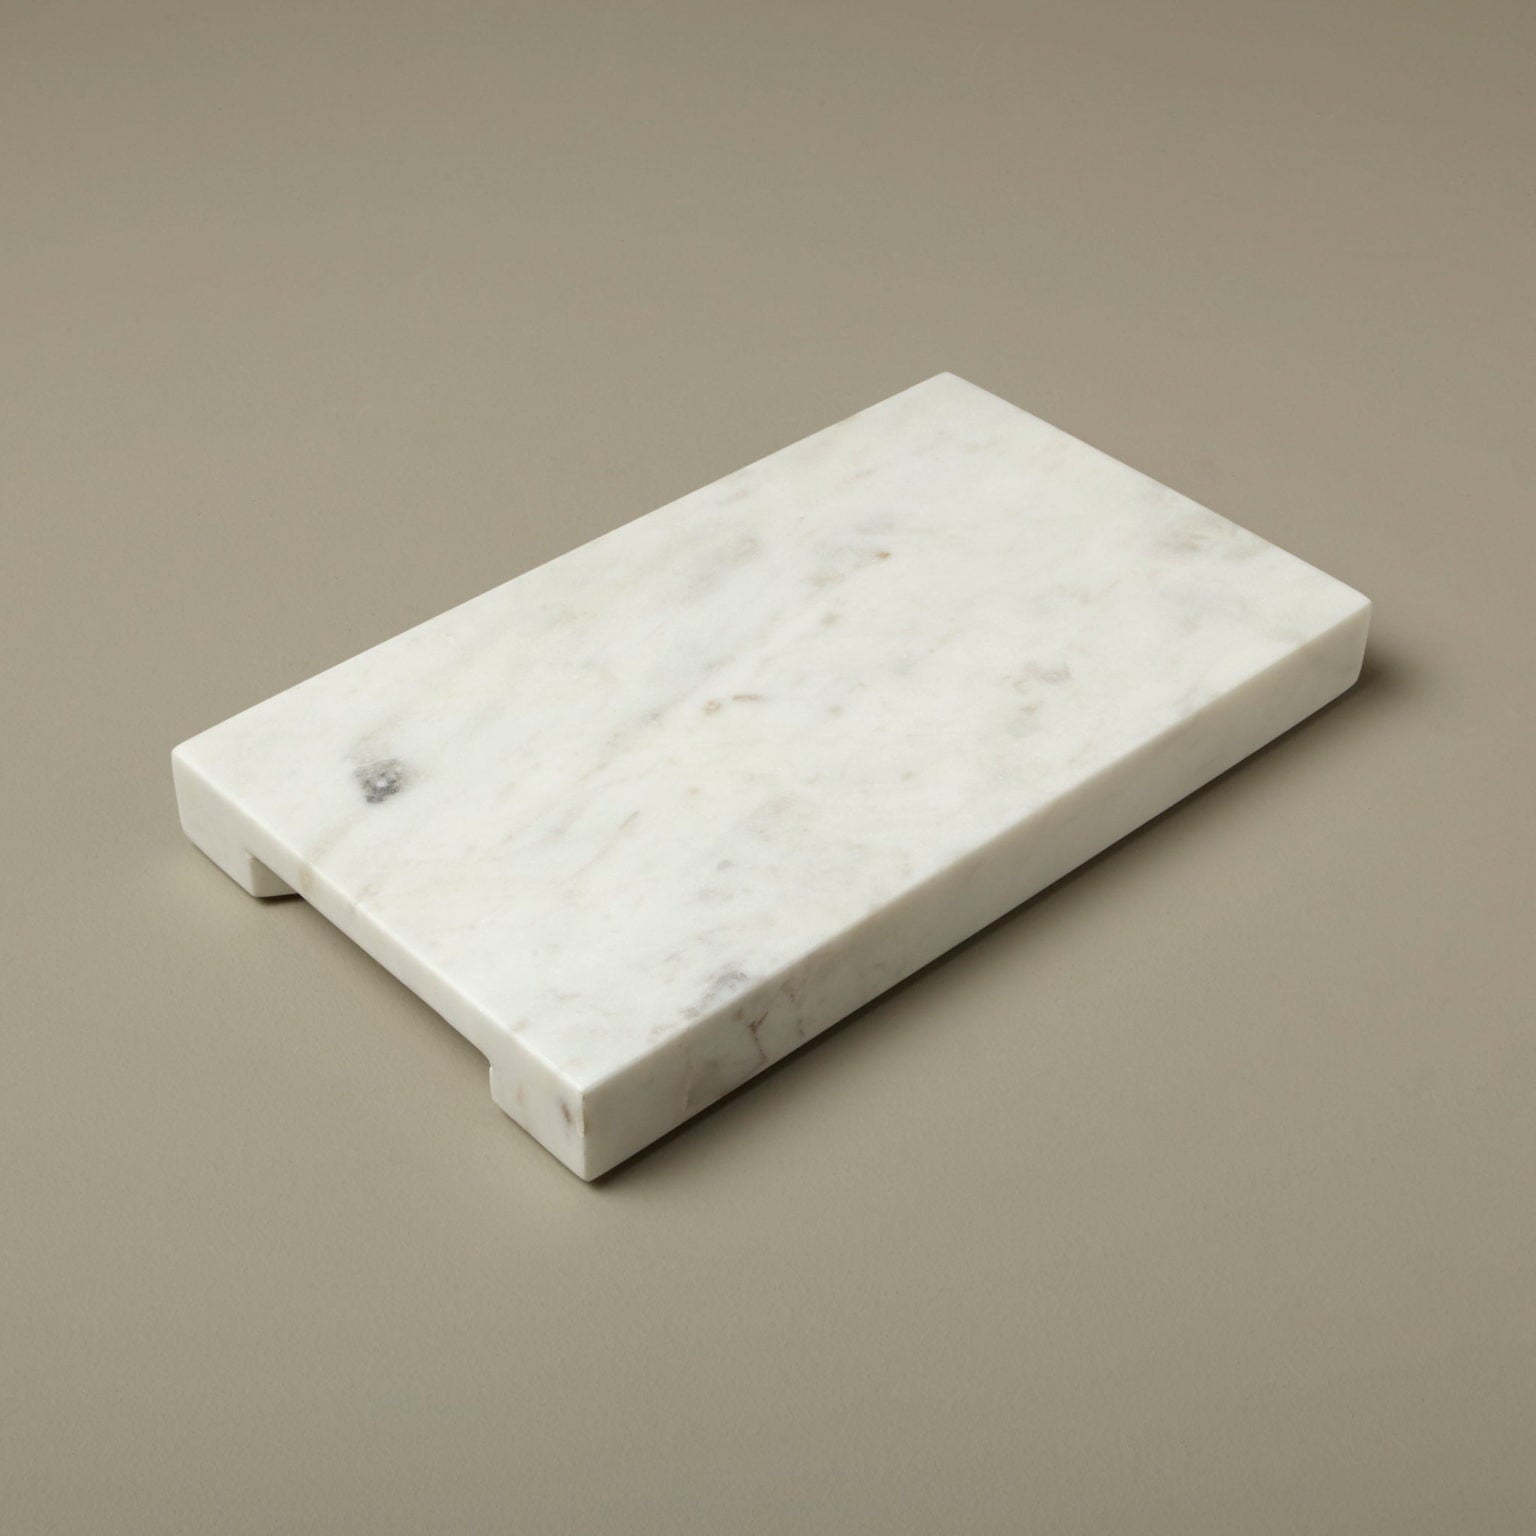 Be-Home_White-Marble-Prep-Board-with-Handle-Grooves_580-03-1536x1536